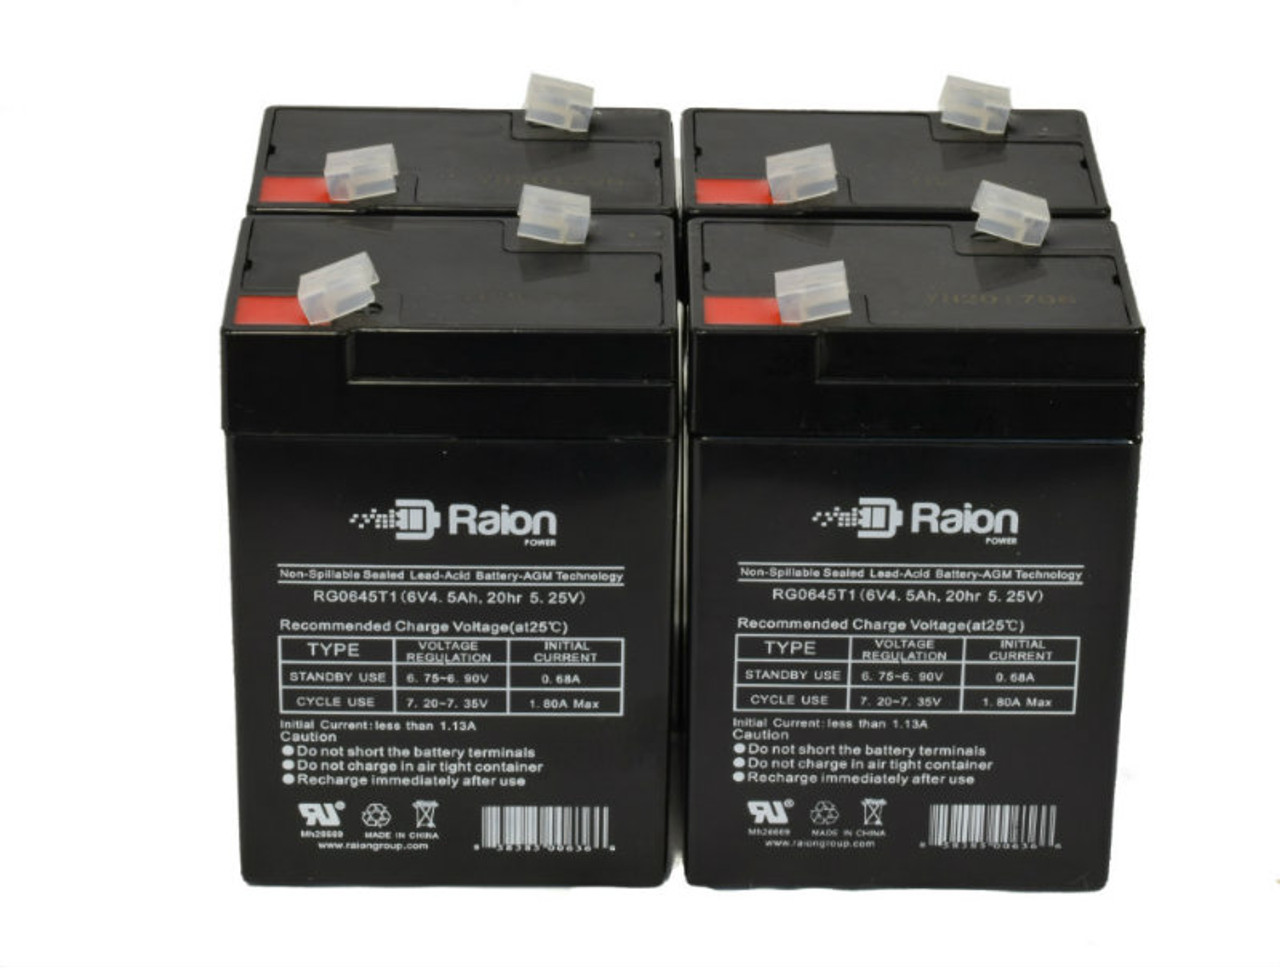 Raion Power 6V 4.5Ah Replacement Emergency Light Battery for Light Alarms 5E15BF - 4 Pack